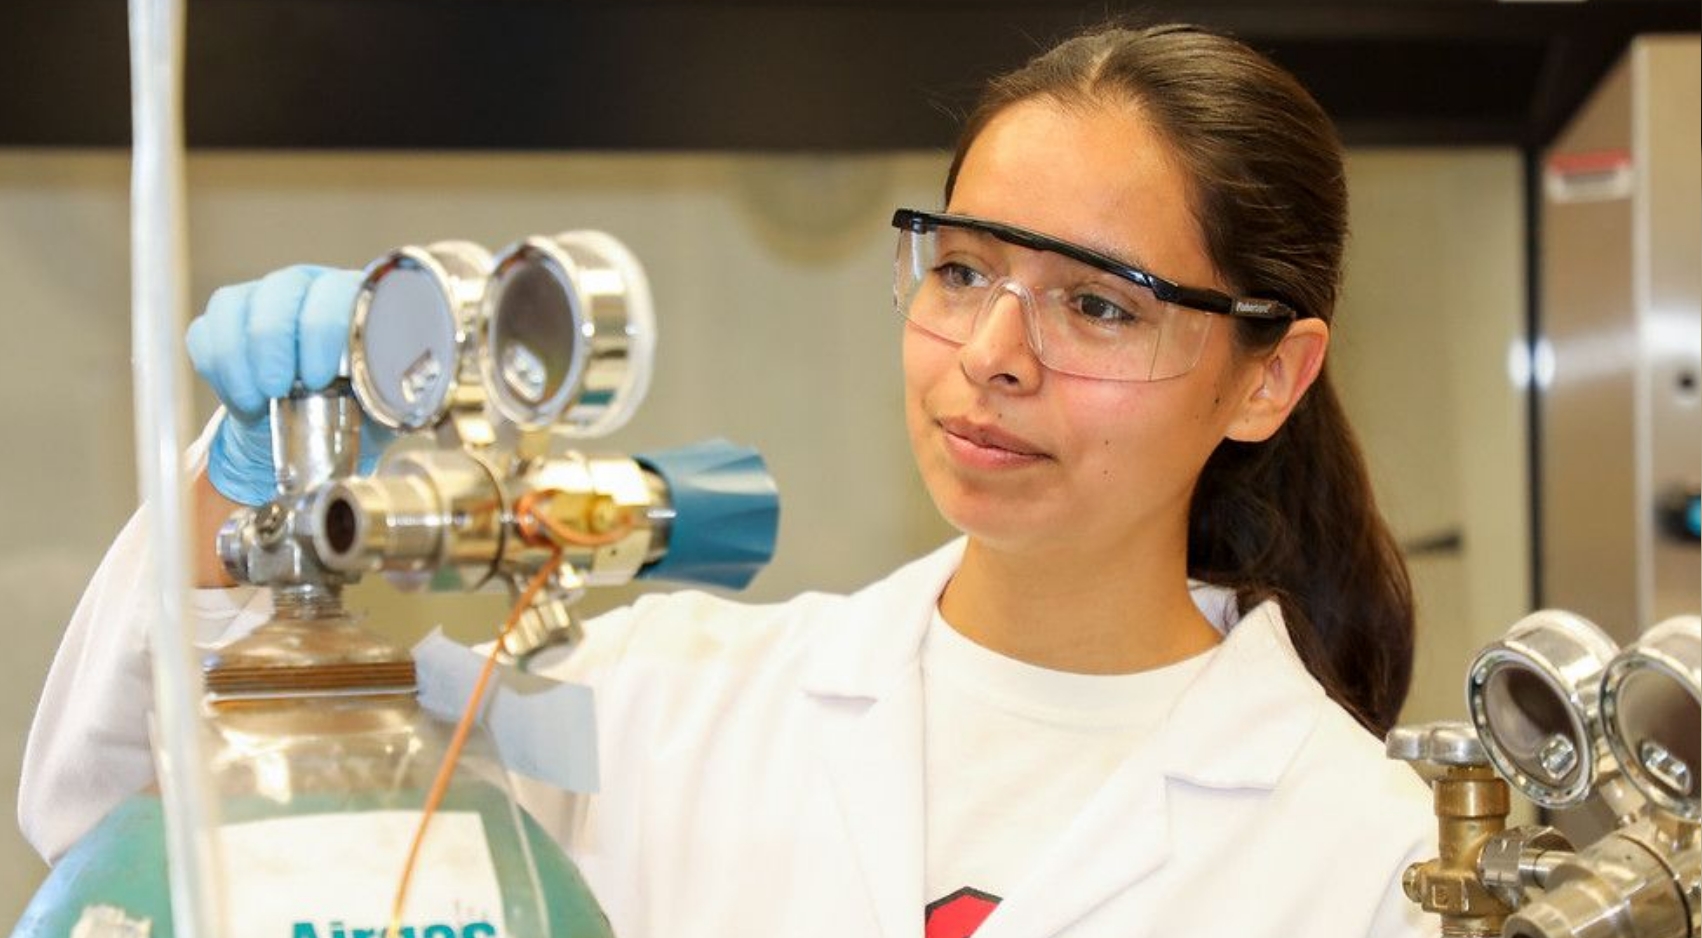 A student works in a laboratory at SDSU's School of Public Health. The signing of SB 684 enables SDSU to add the DrPH as part of the universitys academic degree offerings.